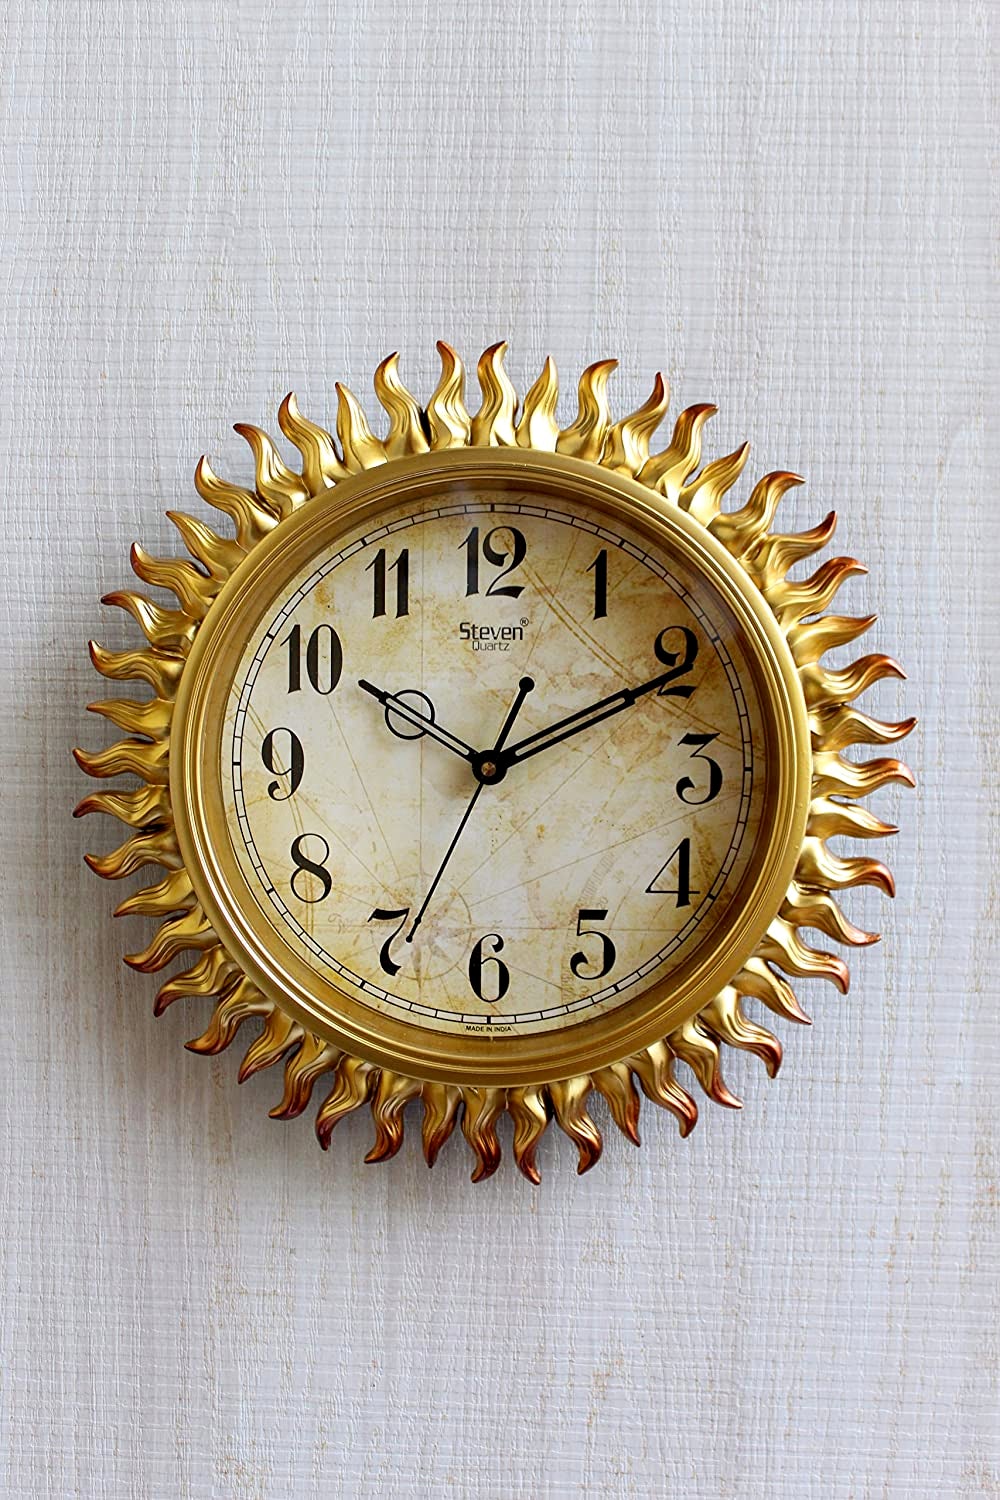 FunkyTradition Royal Designer Golden Sun Shaped Wall Clock, Wall Watch, Wall Decor for Home Office Decor and Gifts 31 cm Tall